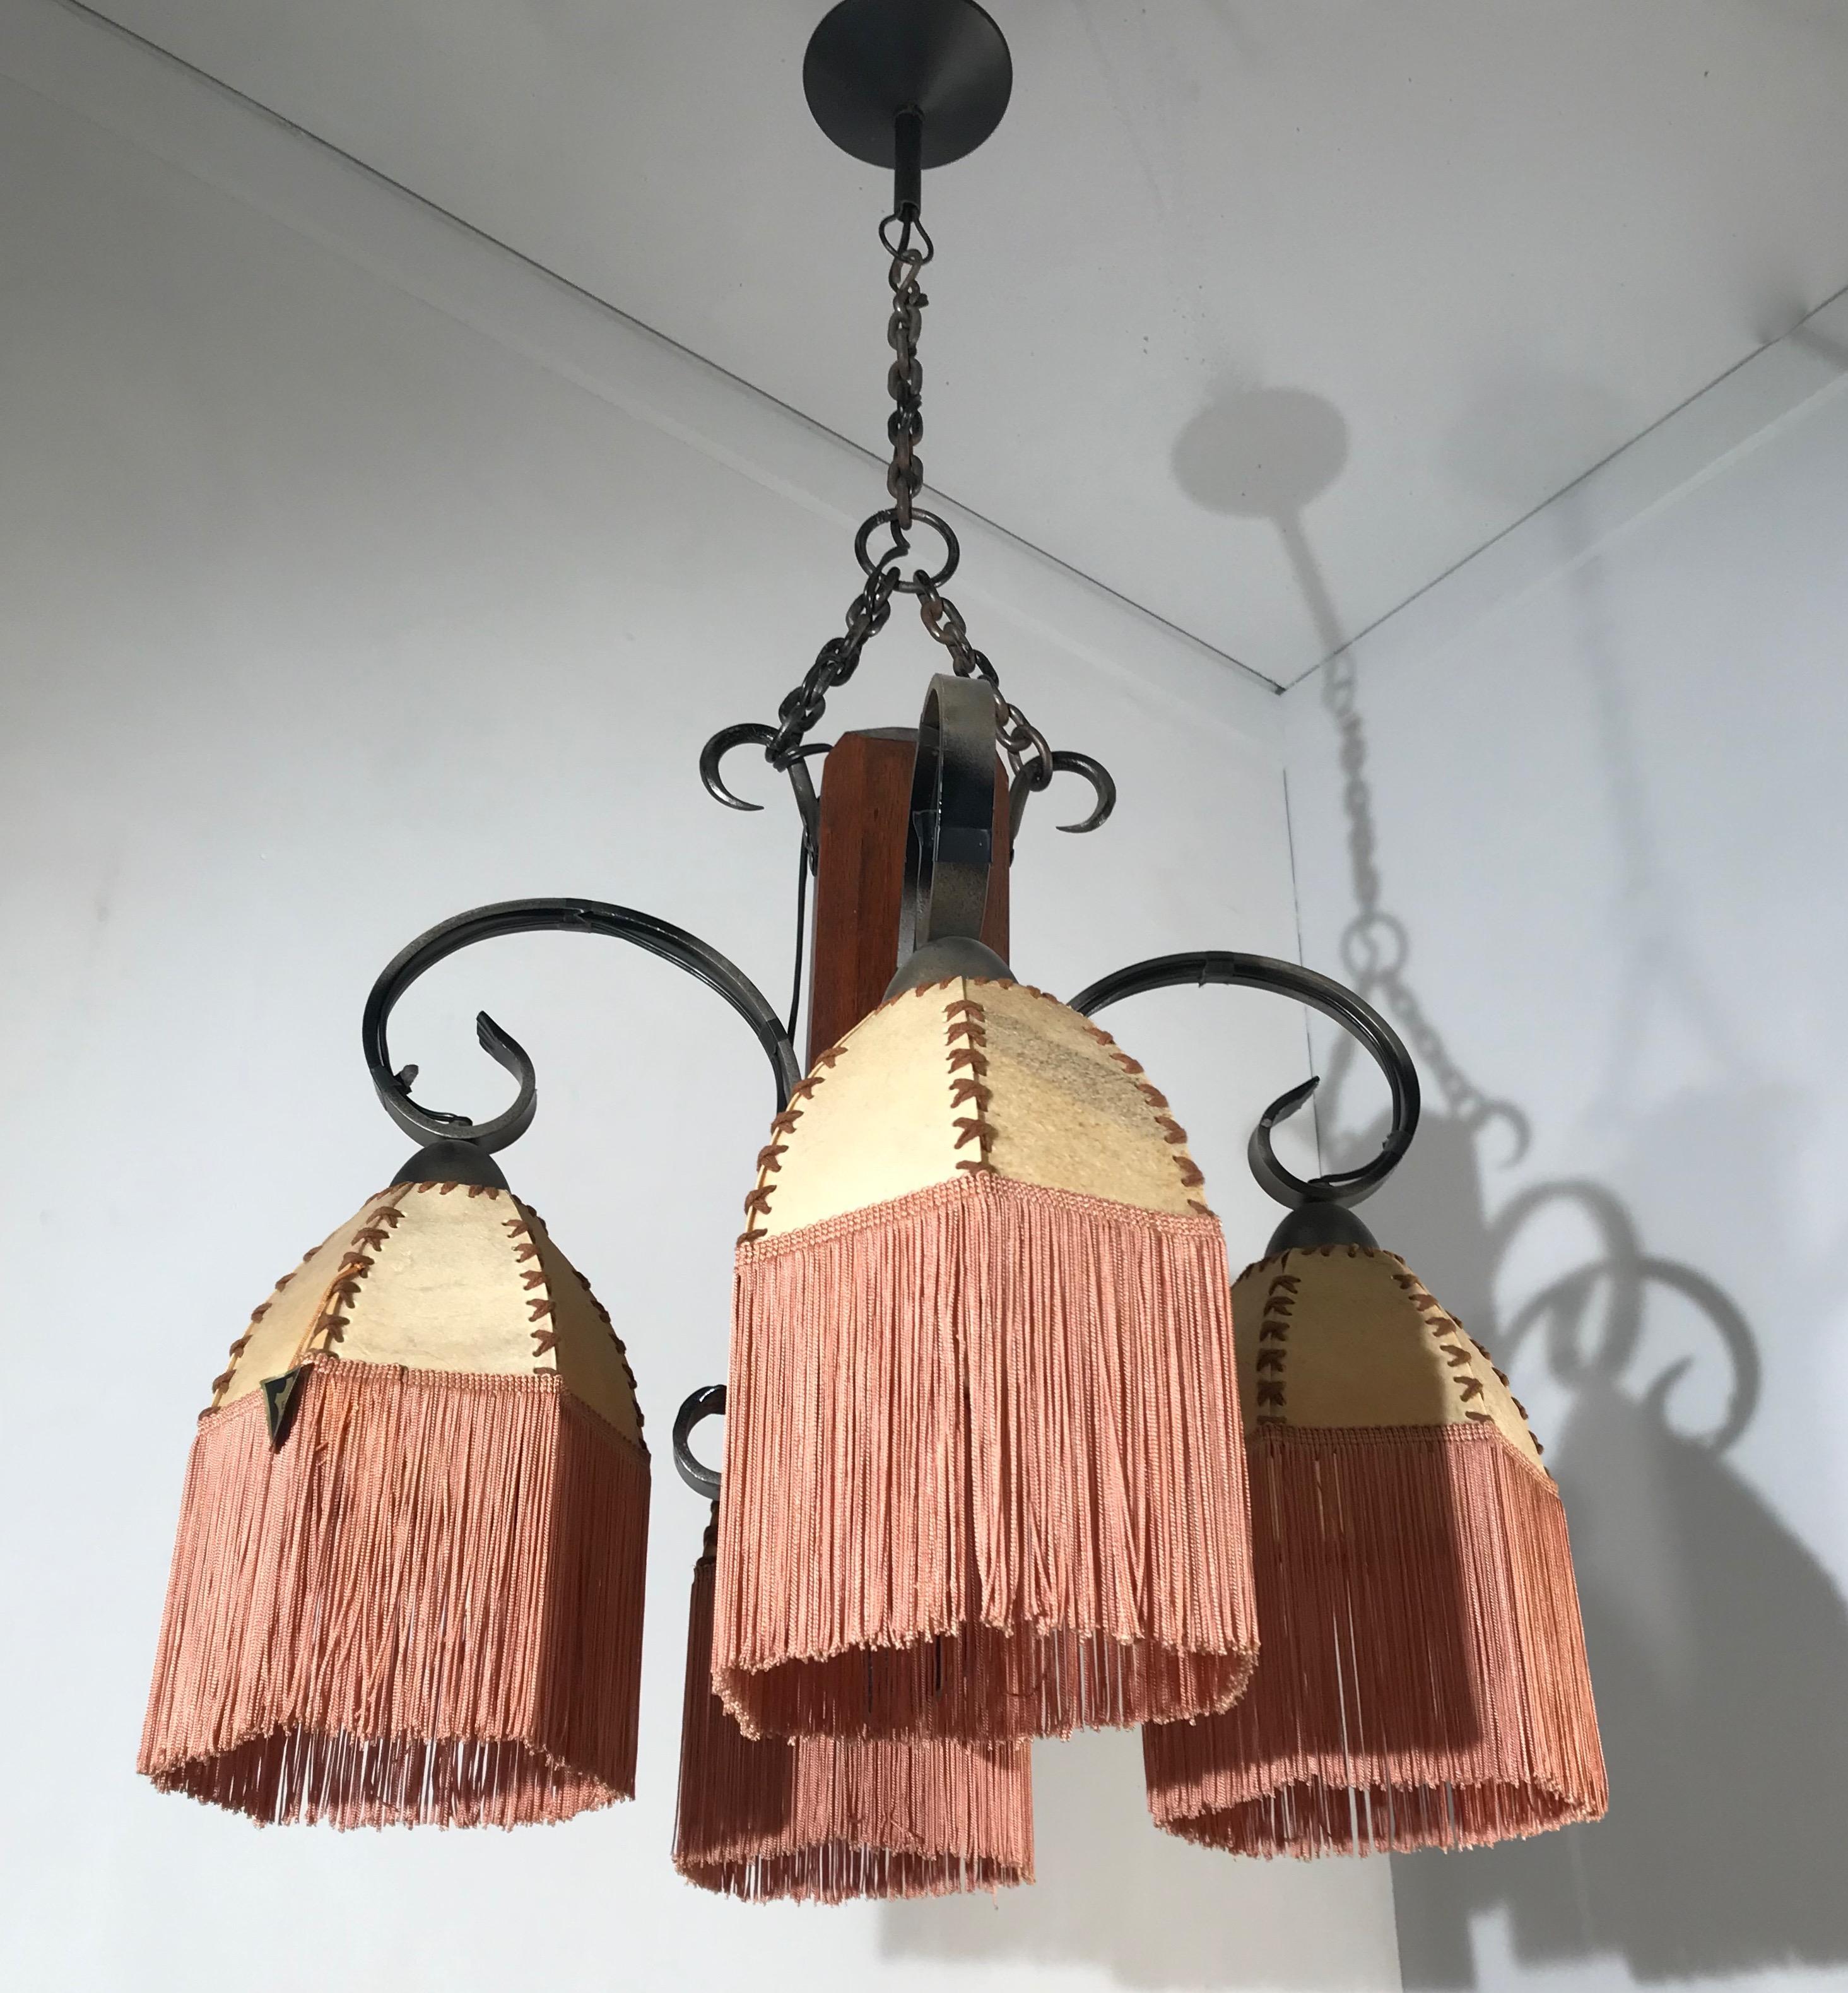 Rare Wrought Iron and Wood Pendant Light Fixture with Leather Shades and Fringes For Sale 3